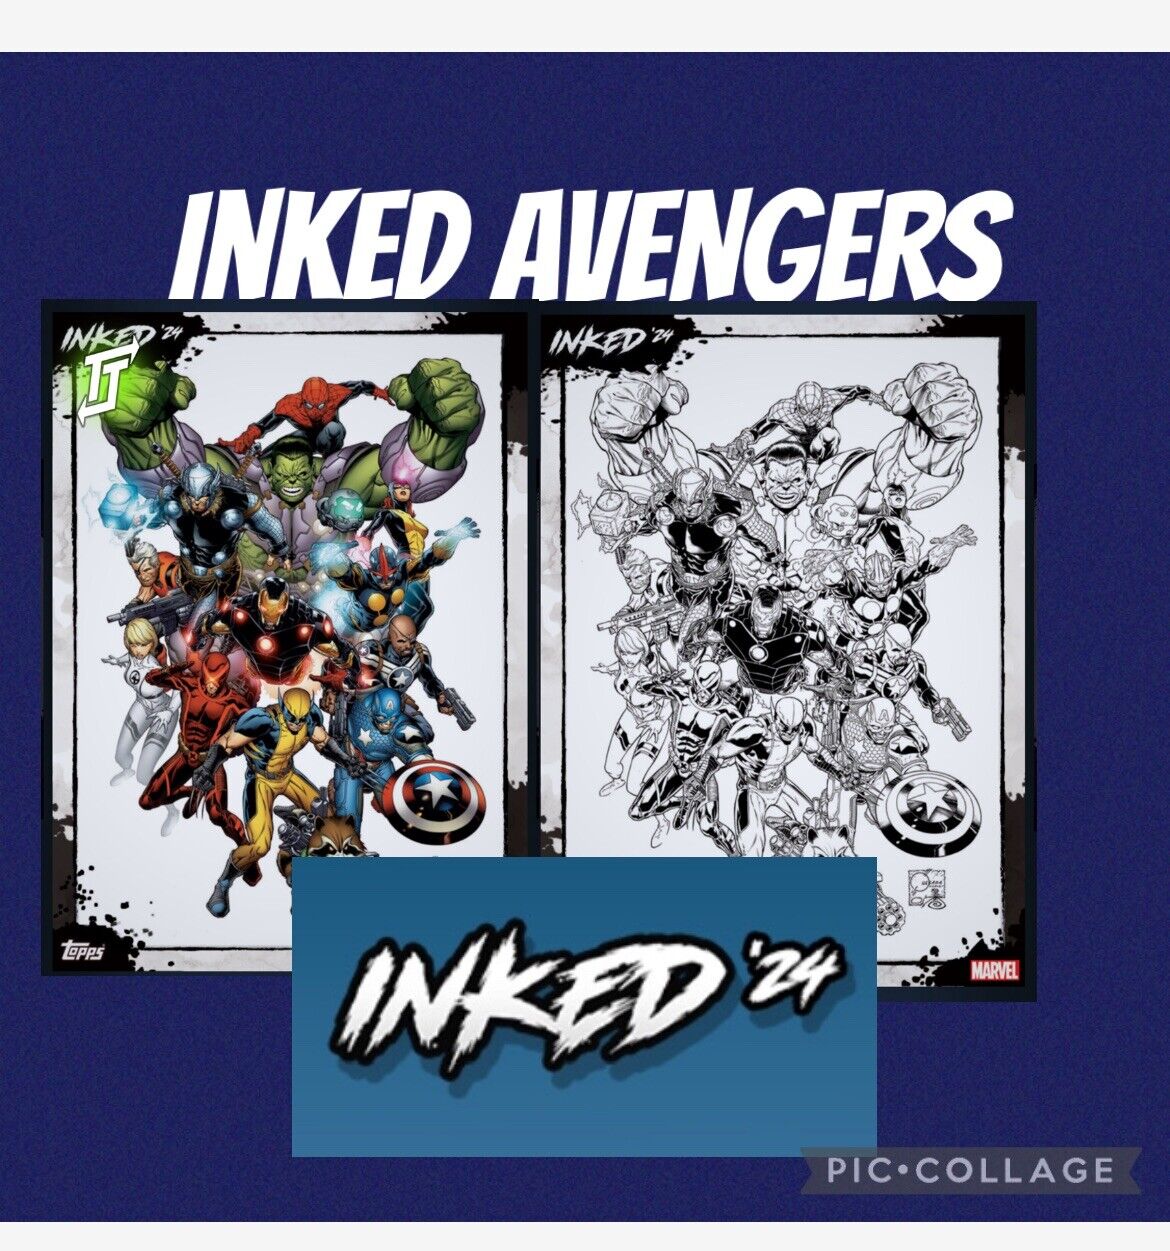 Topps Marvel Collect AVENGERS INKED  1 color 1 b&w